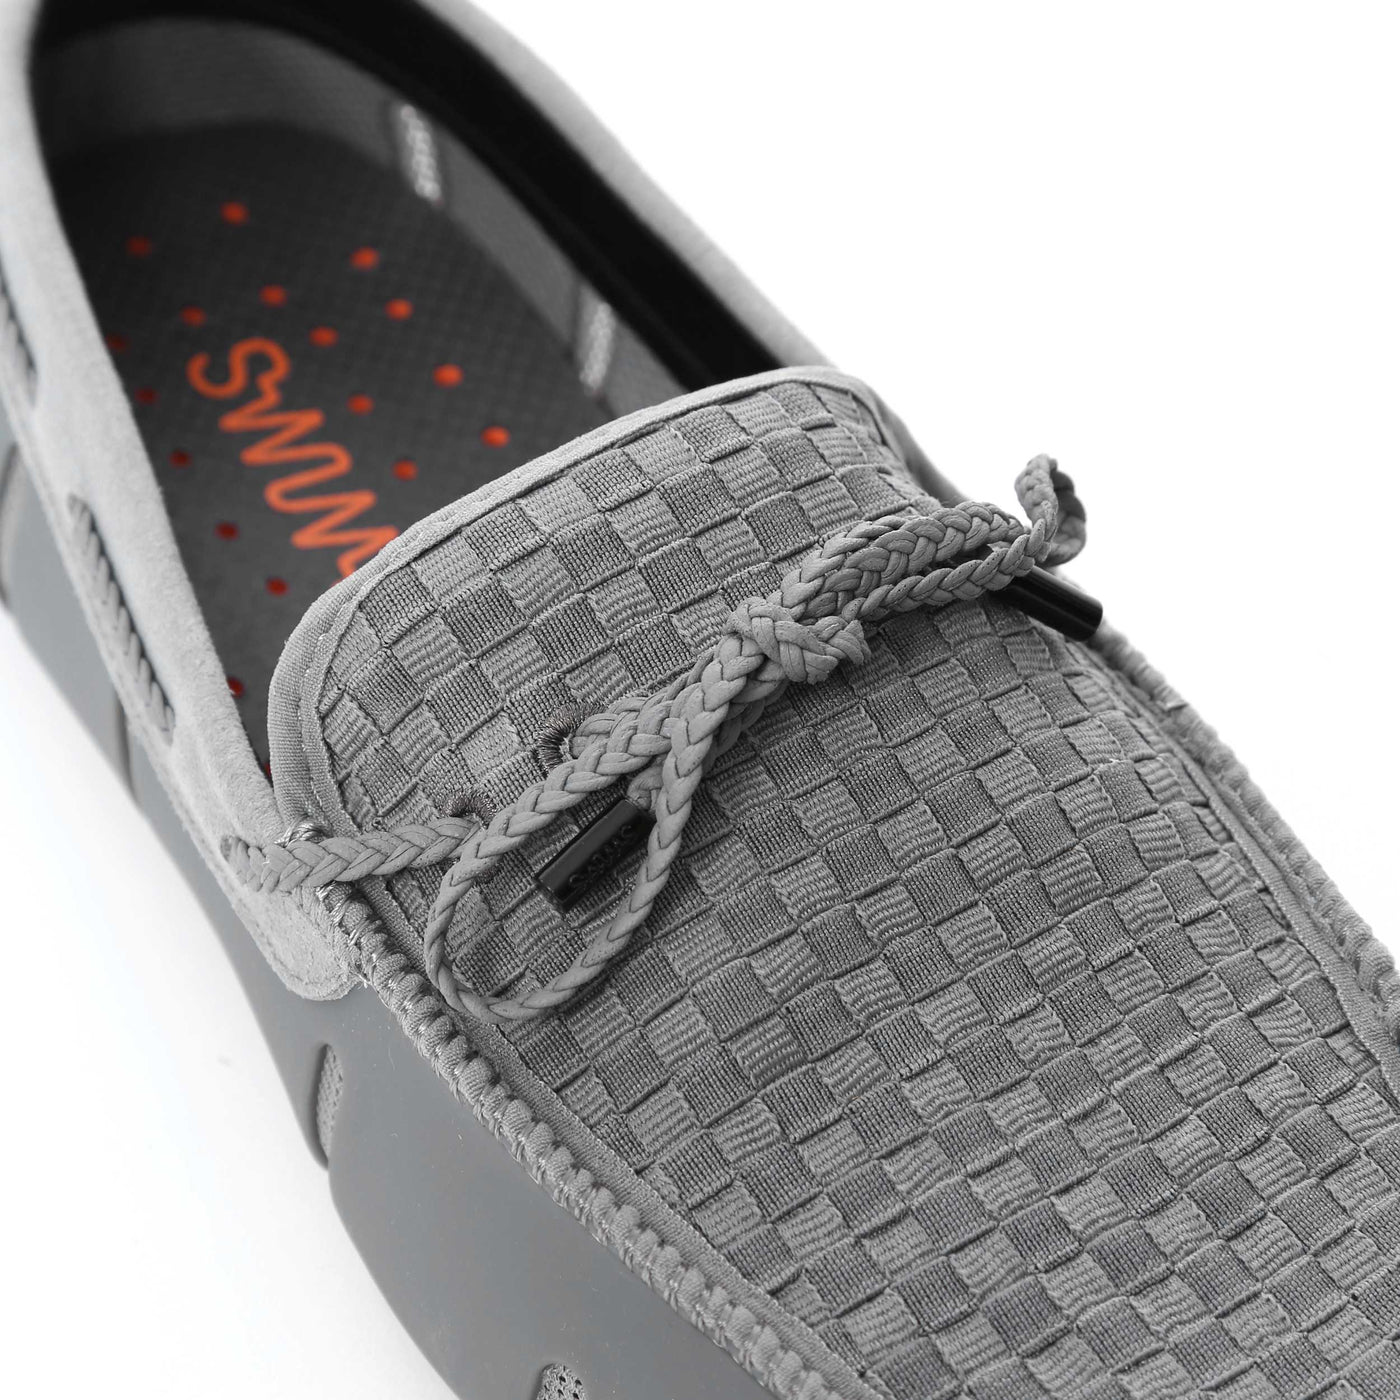 Swims Woven Driver Shoe in Grey Lace